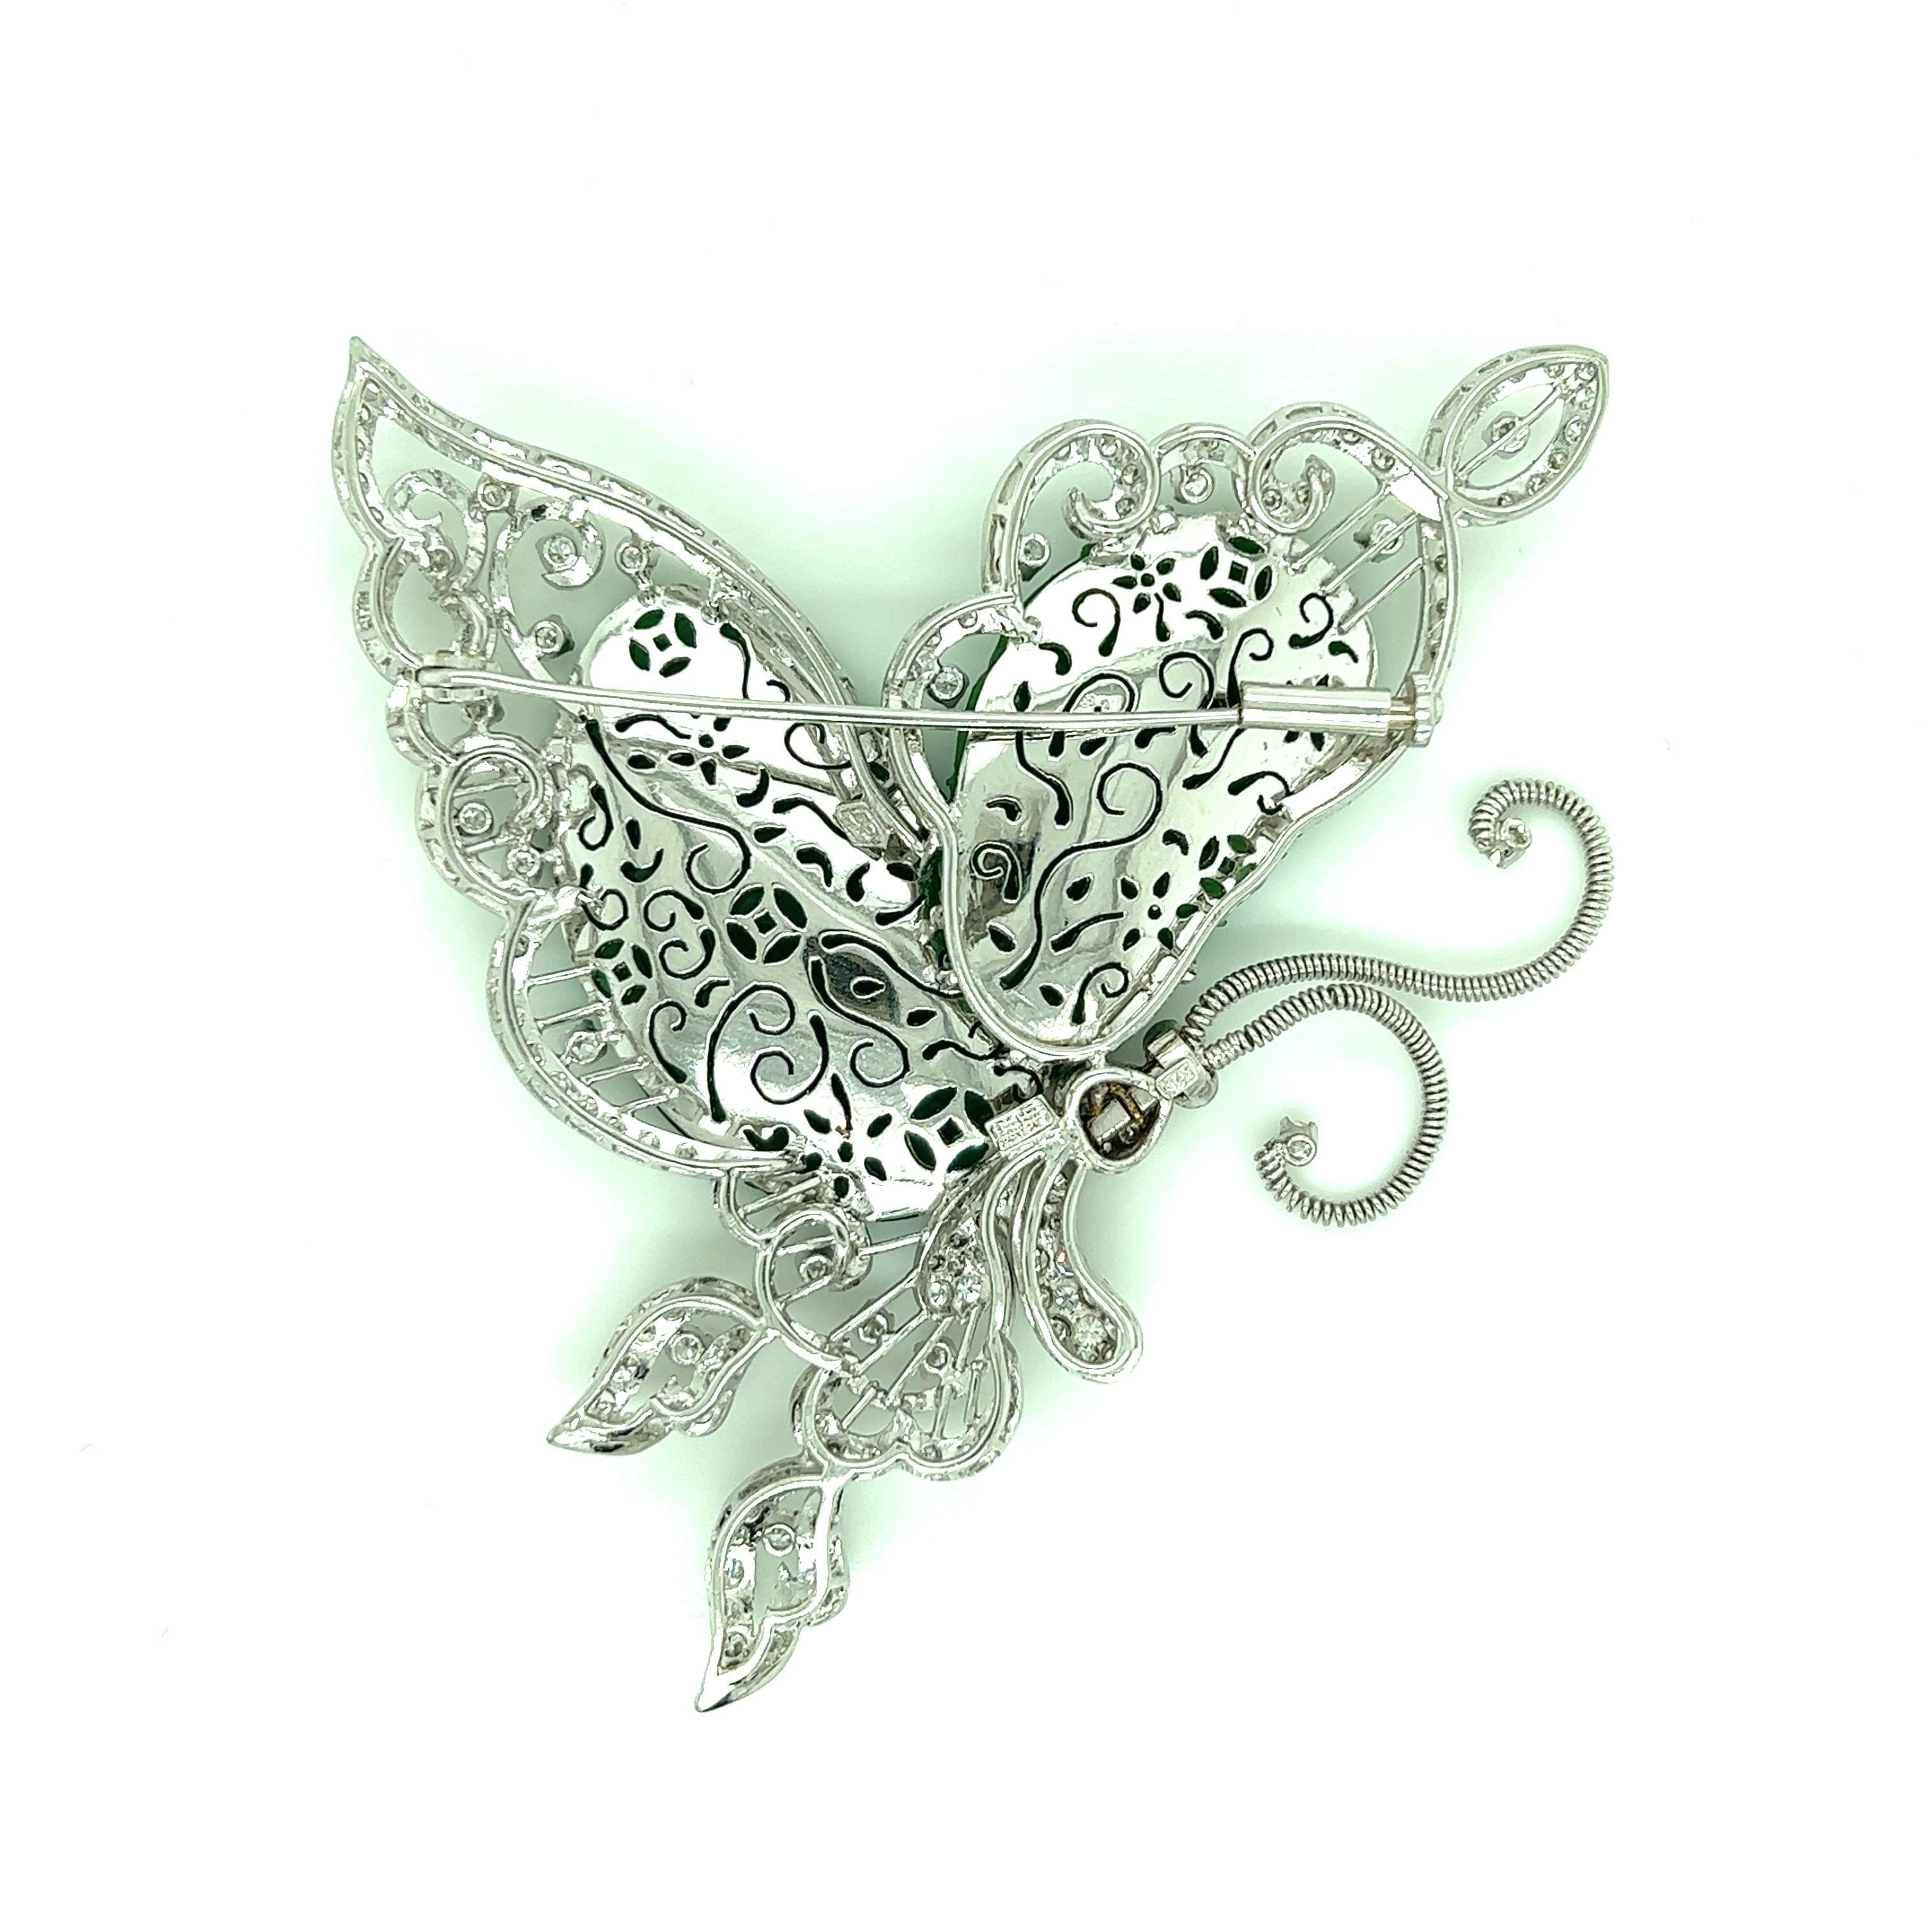 A beautiful butterfly made out of type A natural jade and diamonds set on an ornate 18 karat white gold design. The jade has swirl carvings and the diamonds weigh approximately 2.2 carats. This butterfly's antennae is made out of thin spring, which